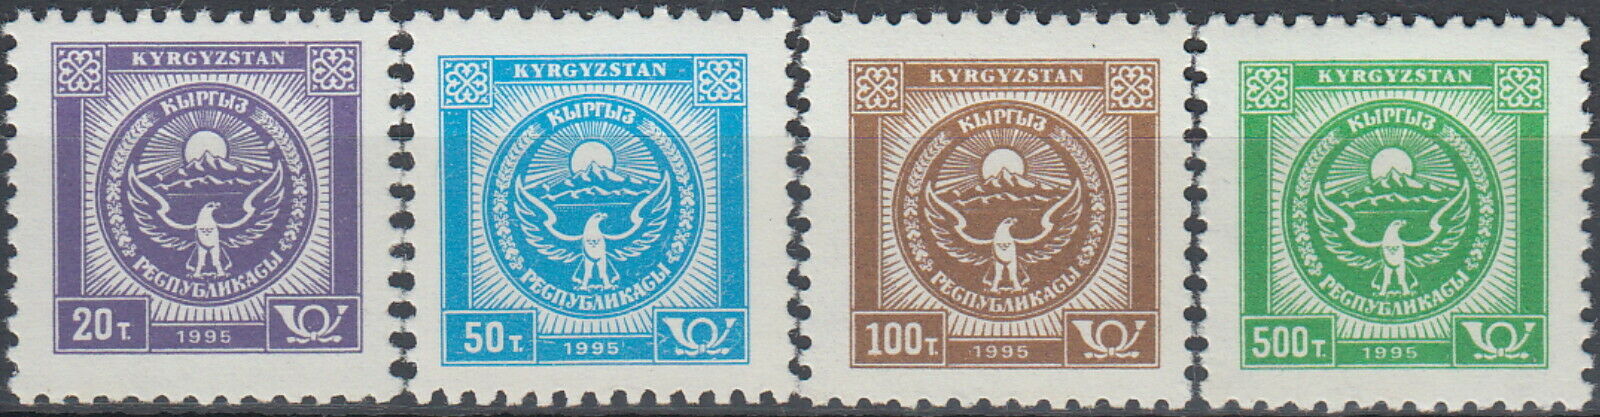 Kyrgyzstan Defins National Cote Of Arms 1996 Mnh-3 Euro